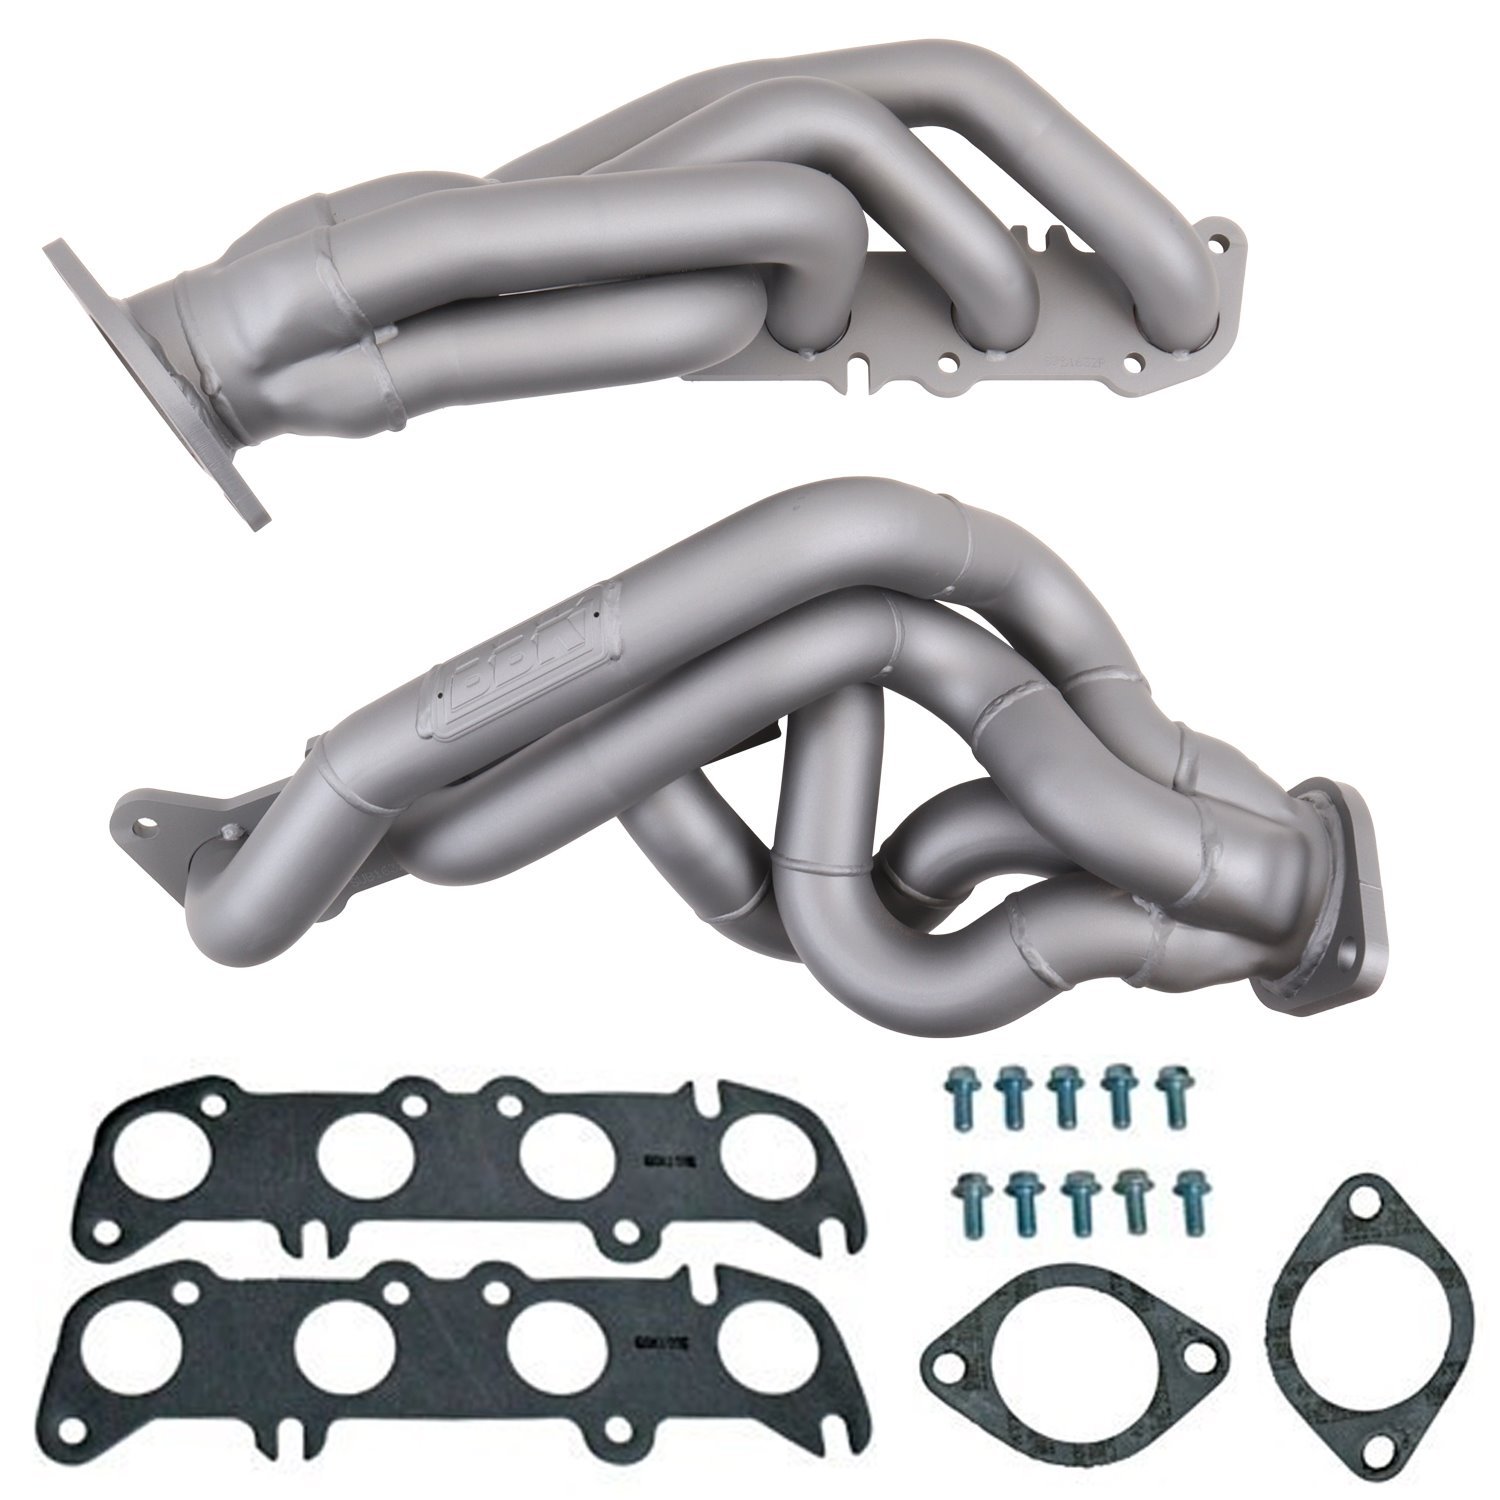 Tuned Shorty-Length Headers 2011-2014 Ford Mustang GT 5.0L